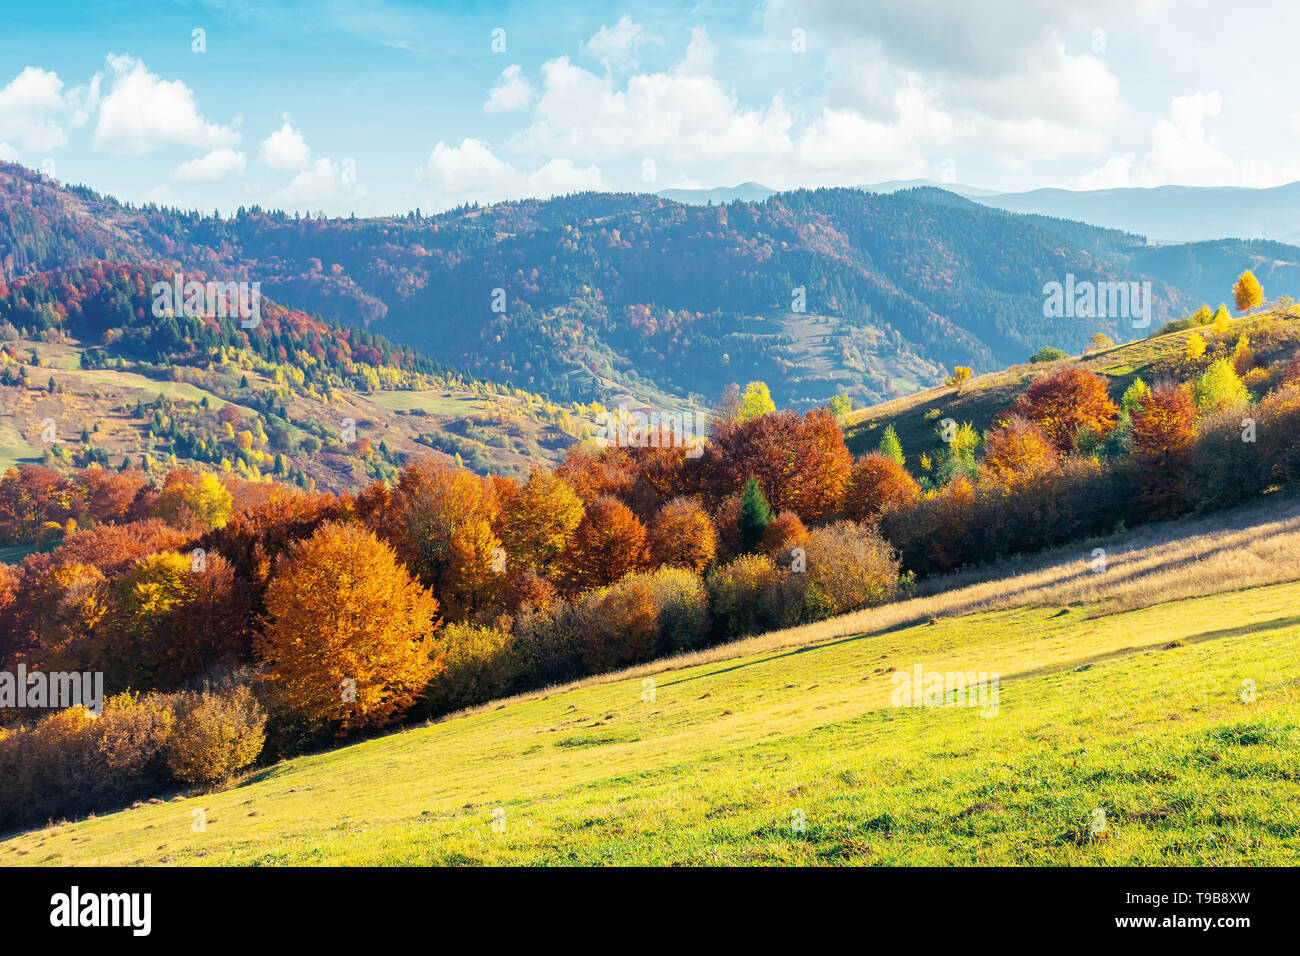 sunny autumn afternoon mountain scenery. trees in fall foliage on the hillside. green grassy meadow. ridge in the distance. bright weather with clouds Stock Photo